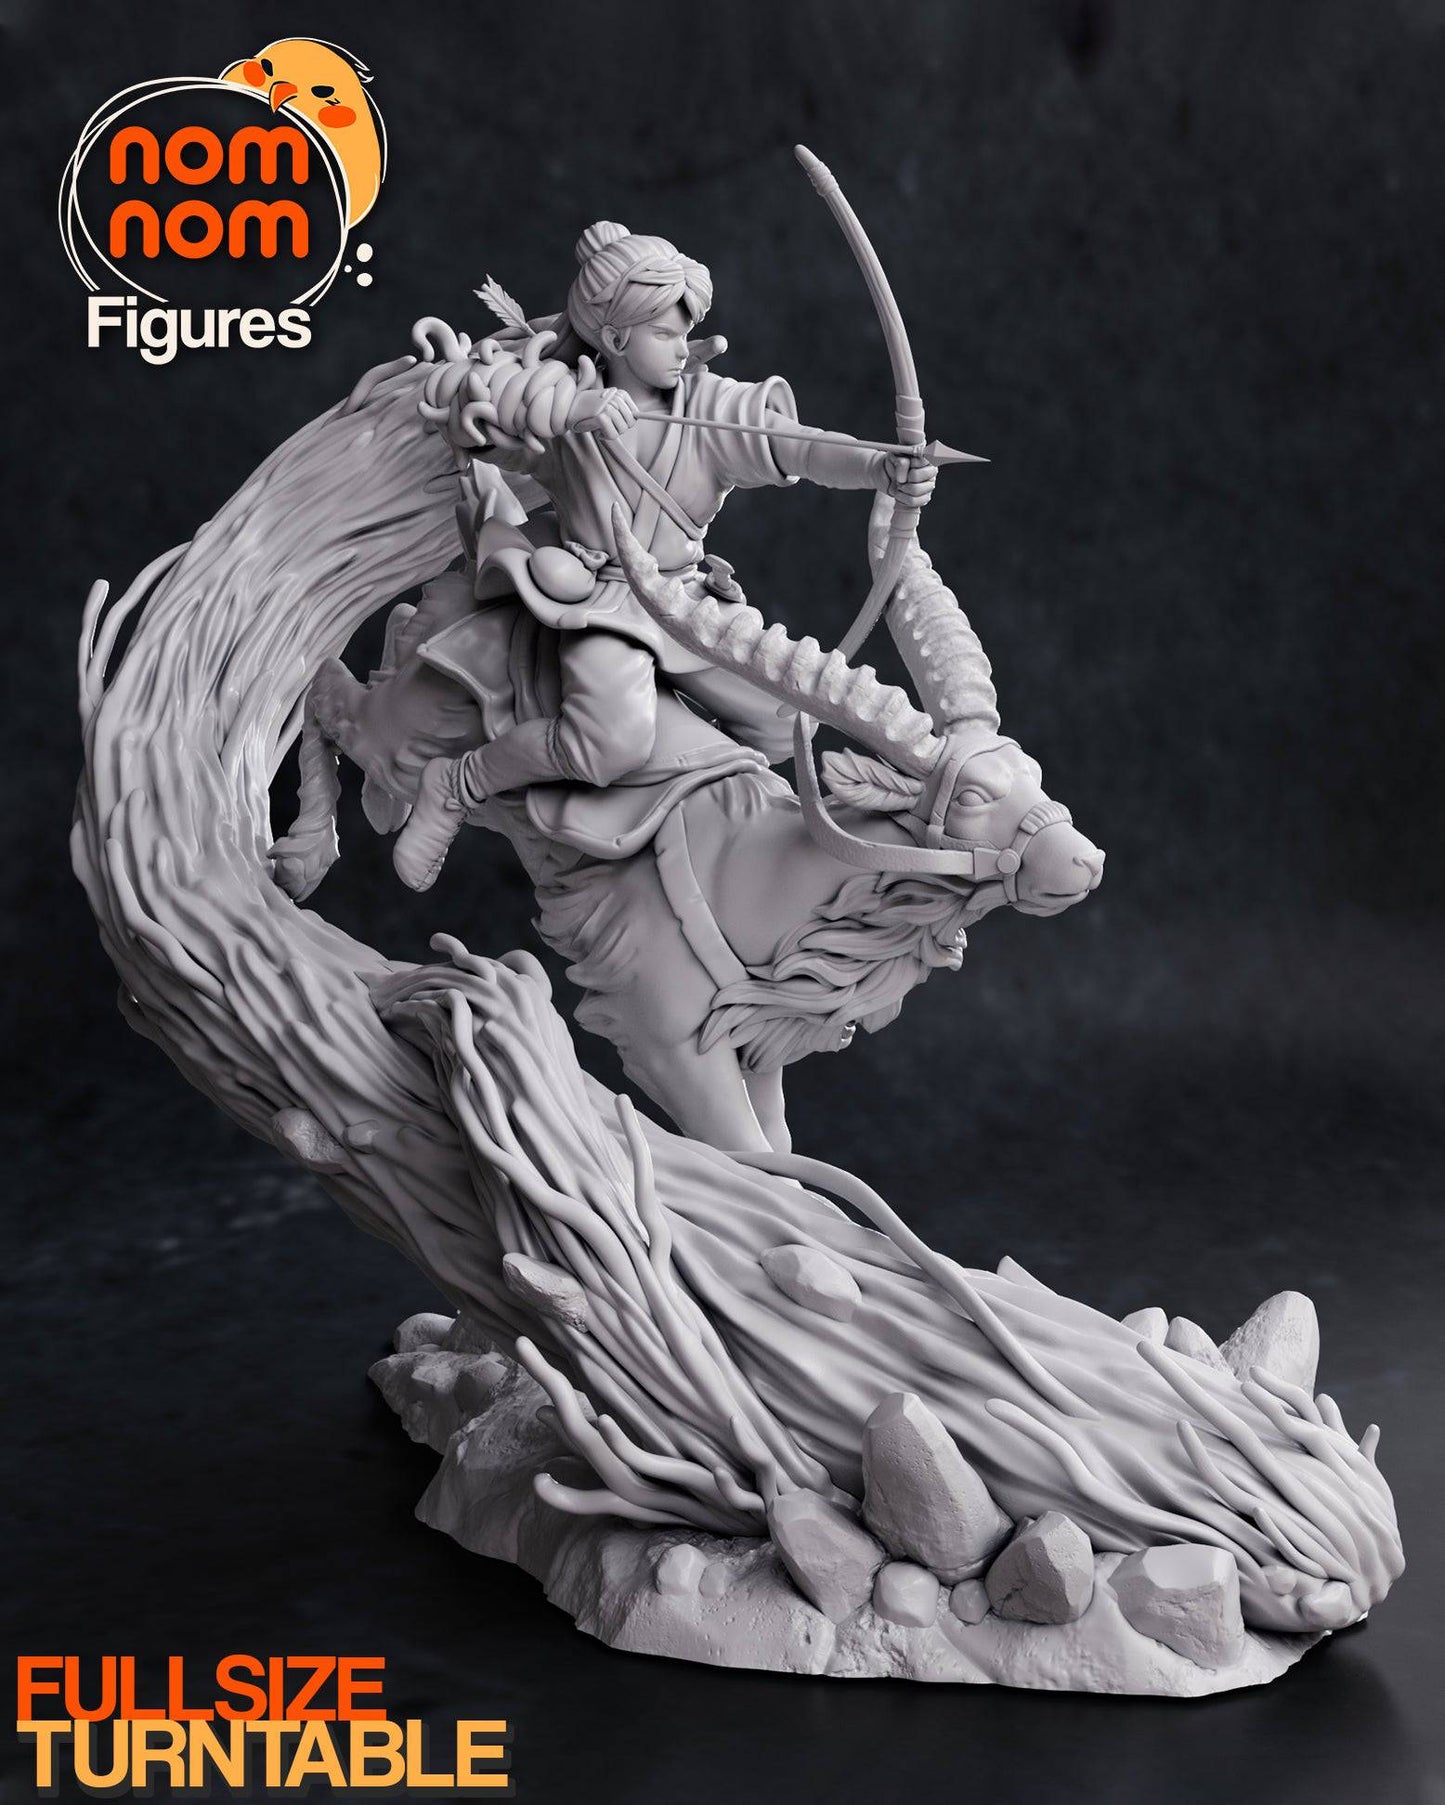 Prince Cursed by Hate | Resin Garage Kit Sculpture Anime Video Game Fan Art Statue | Nomnom Figures - Tattles Told 3D